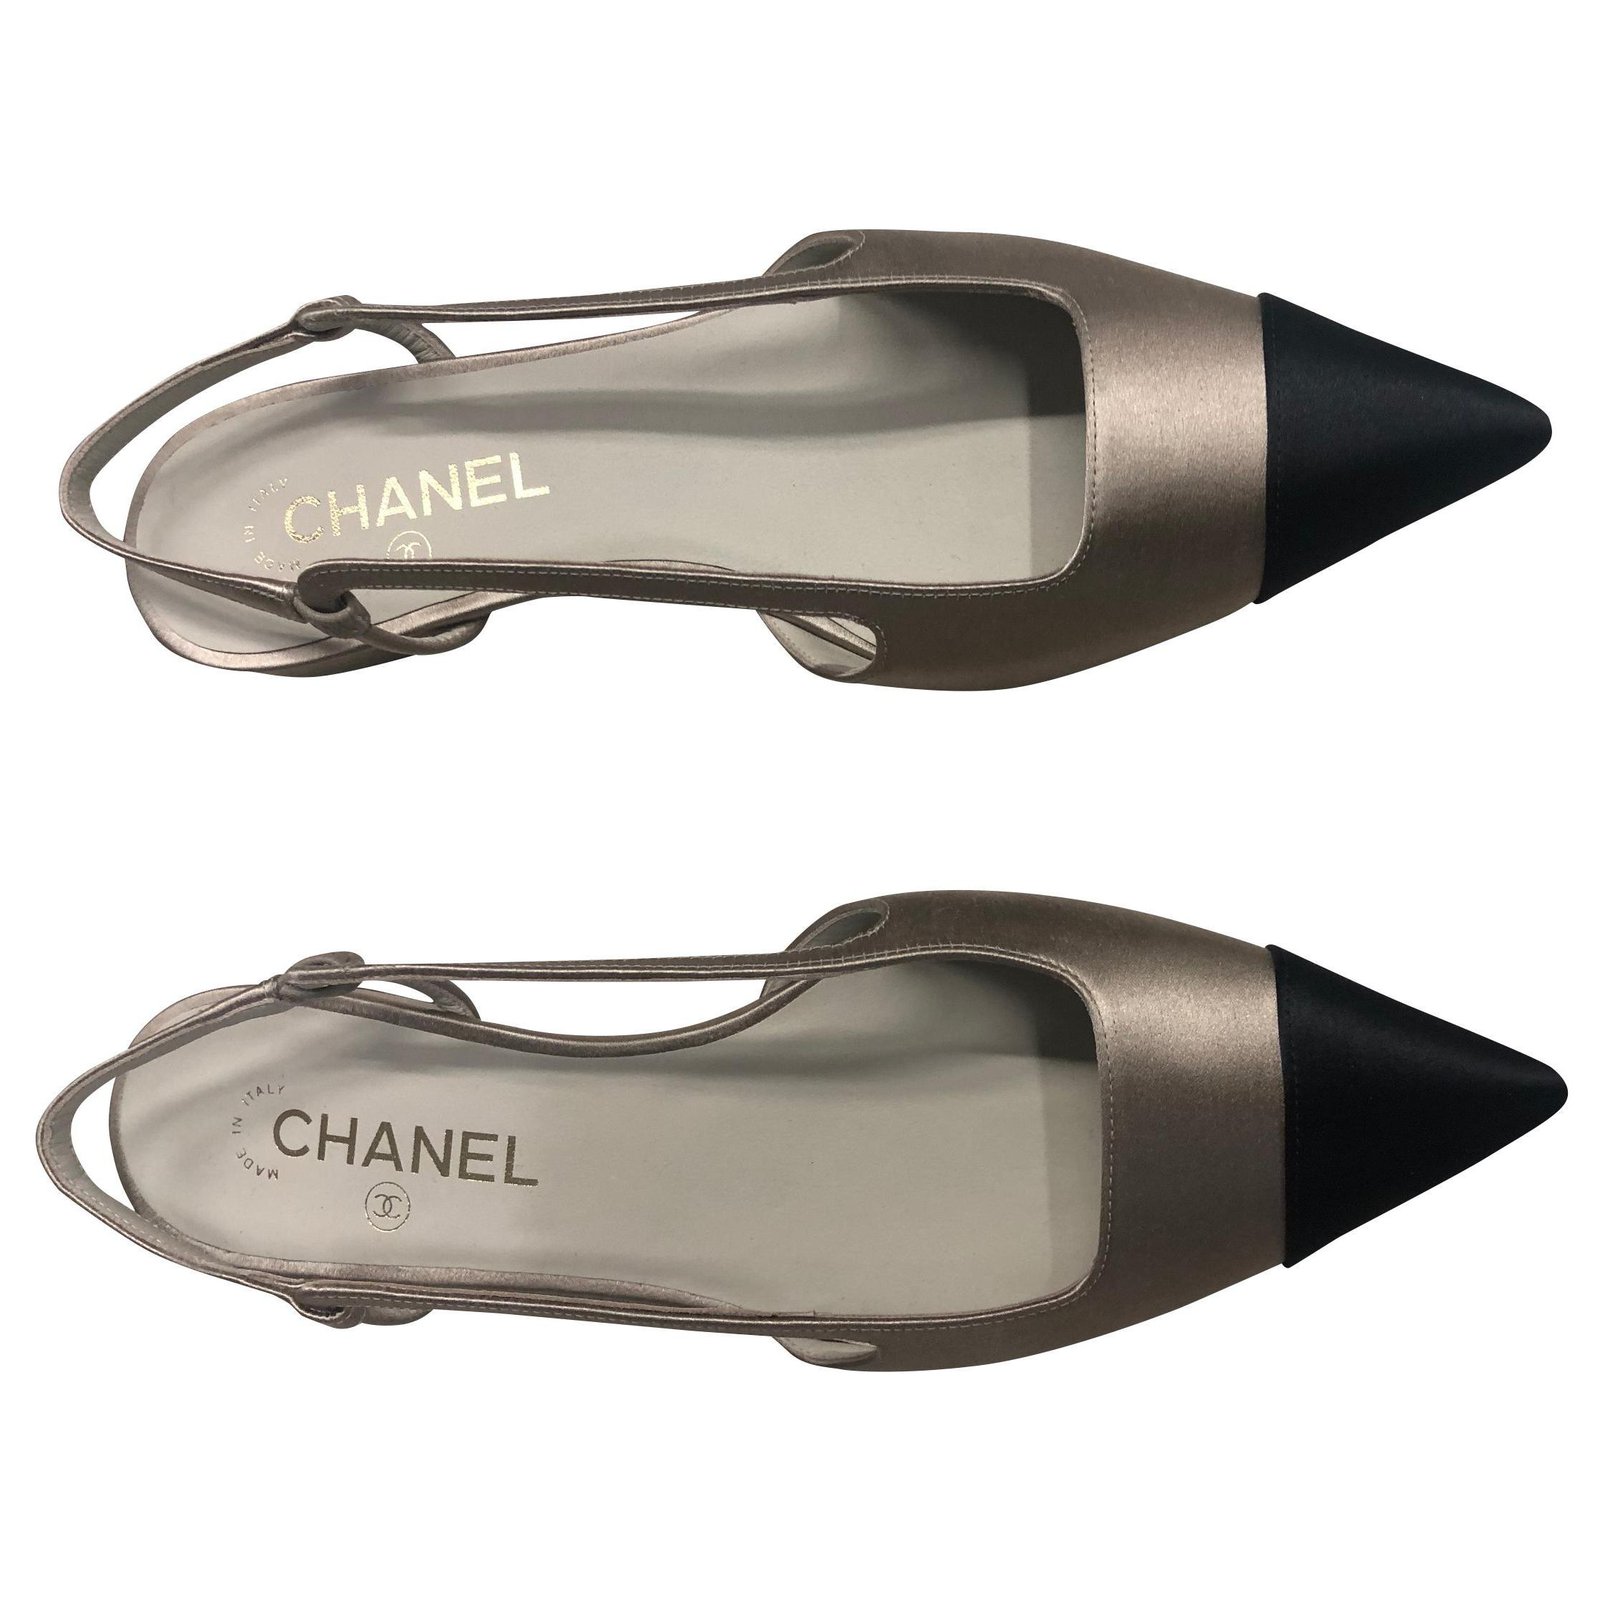 Chanel - Authenticated Slingback Ballet Flats - Leather Beige Plain for Women, Very Good Condition